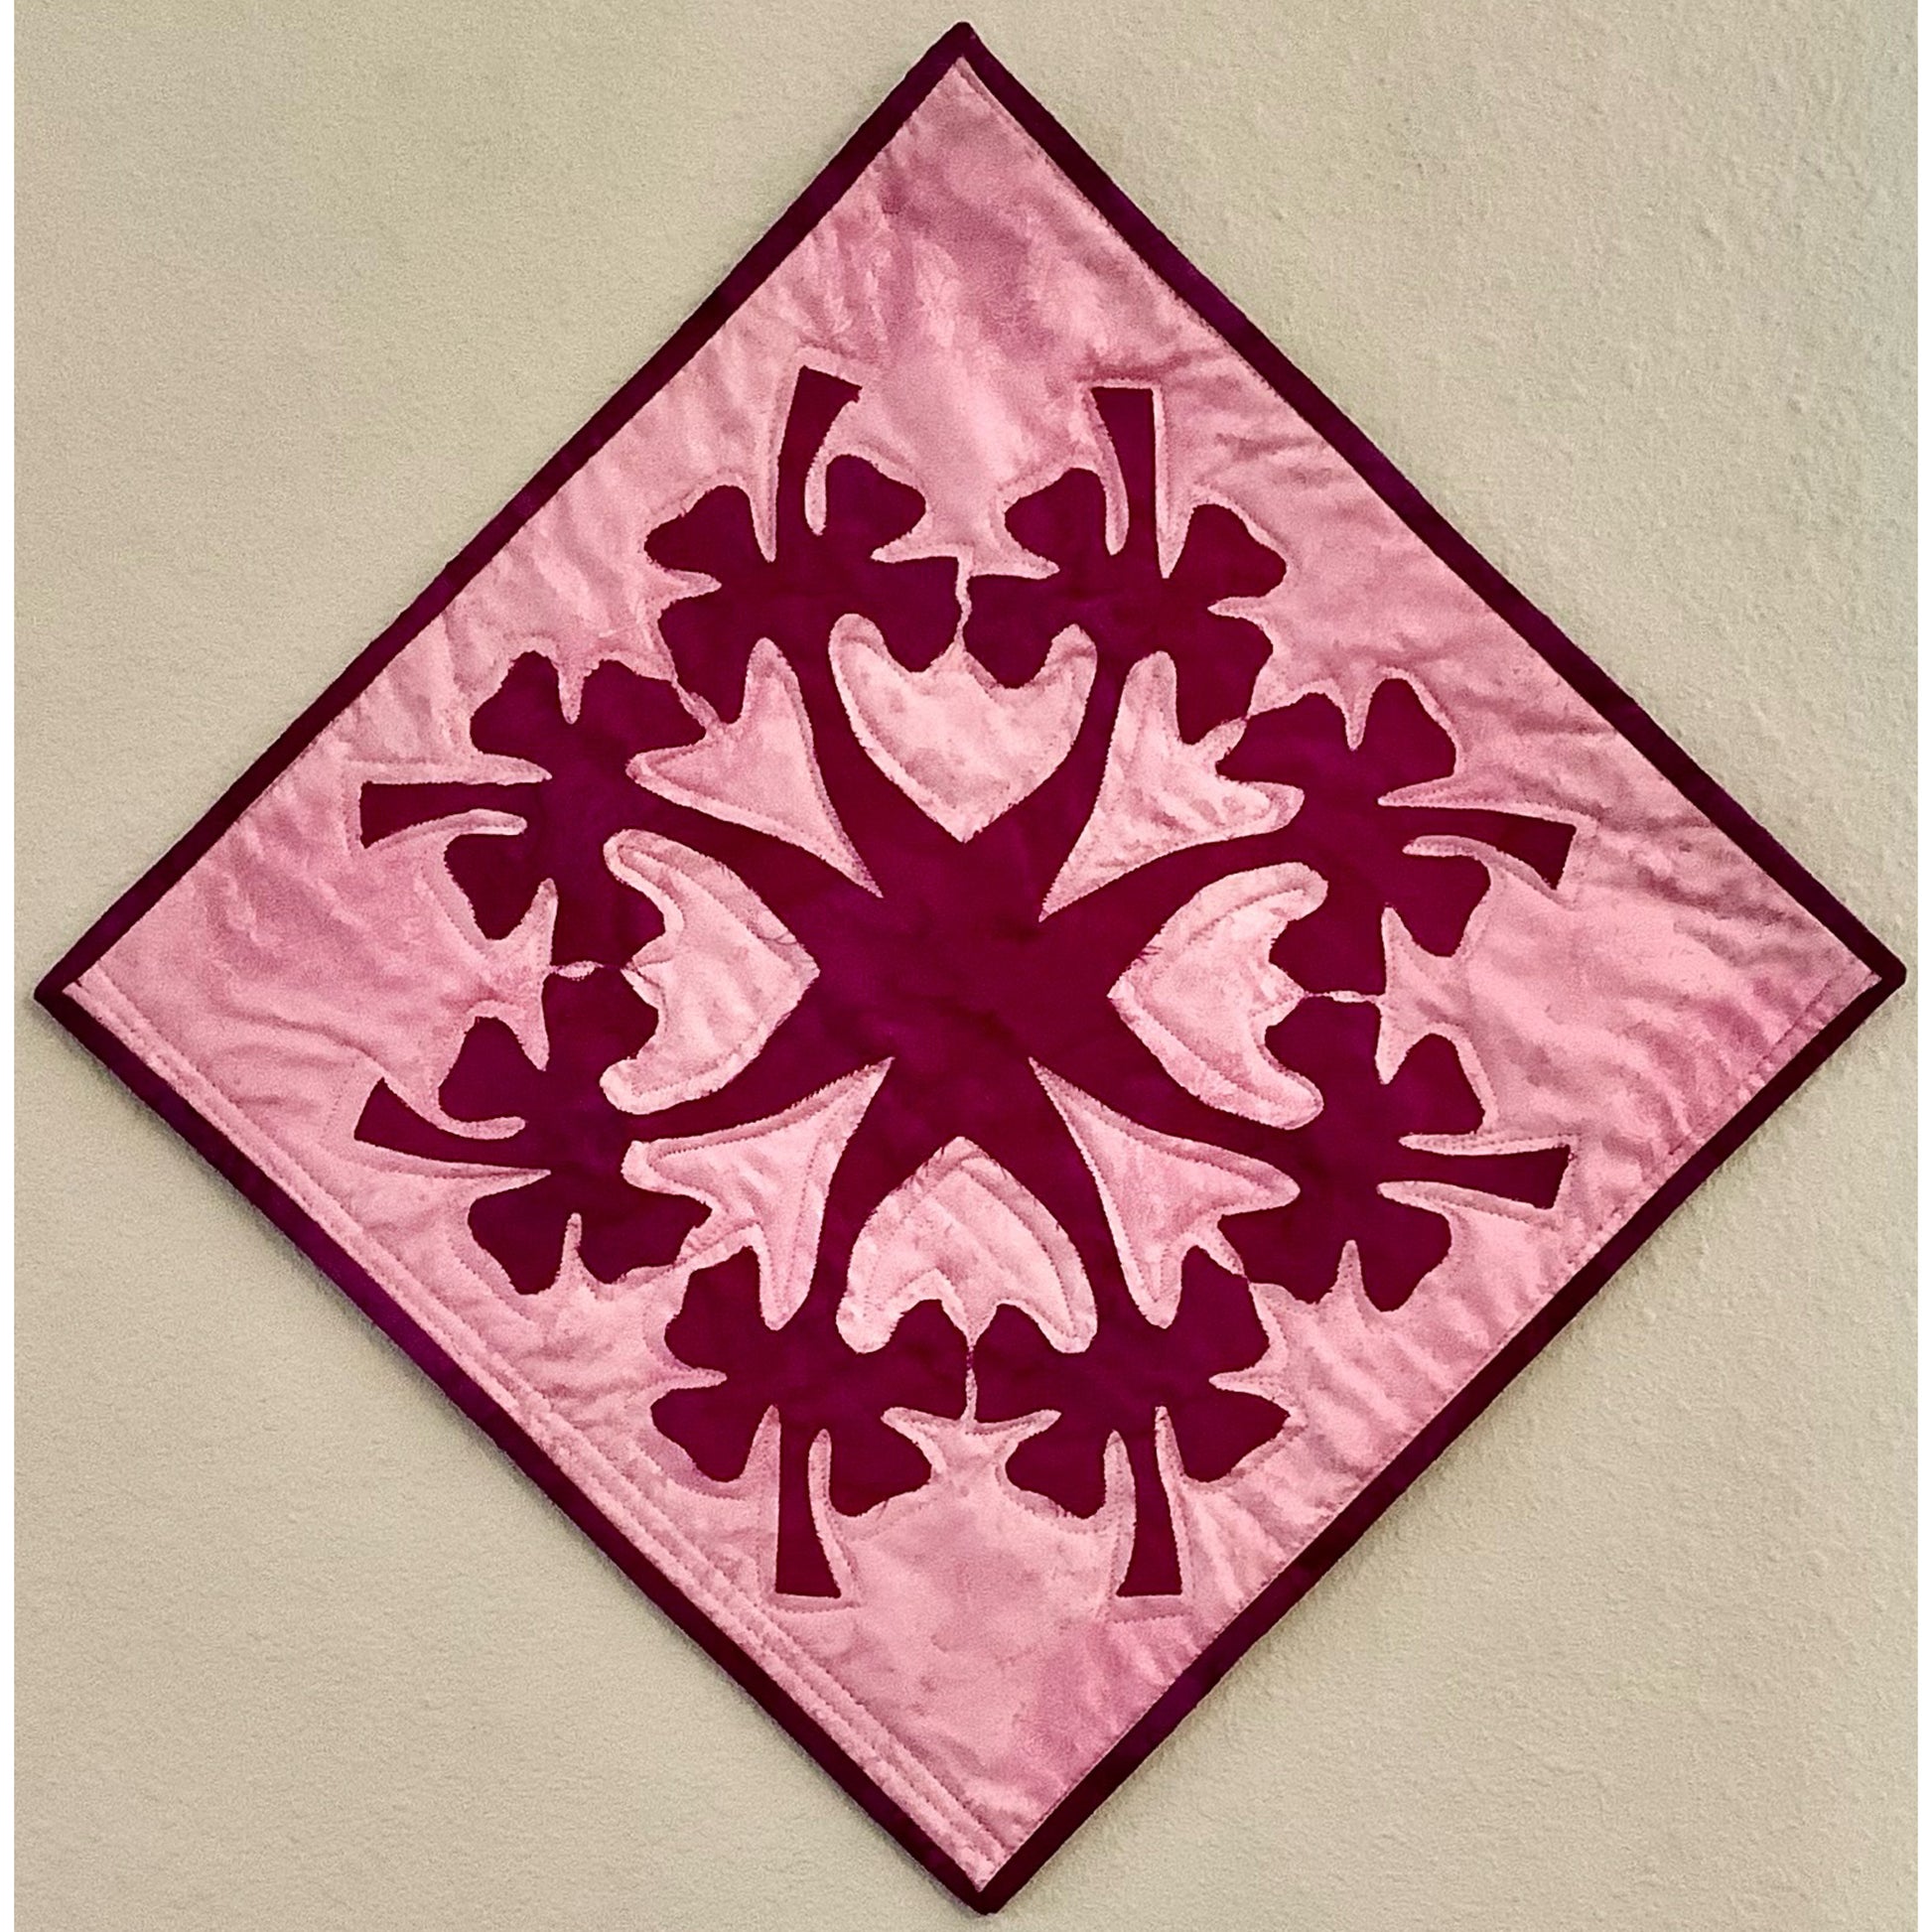 Pink quilt block with floral pattern applique design in red in the middle in a circle with flowers coming out of a main center.